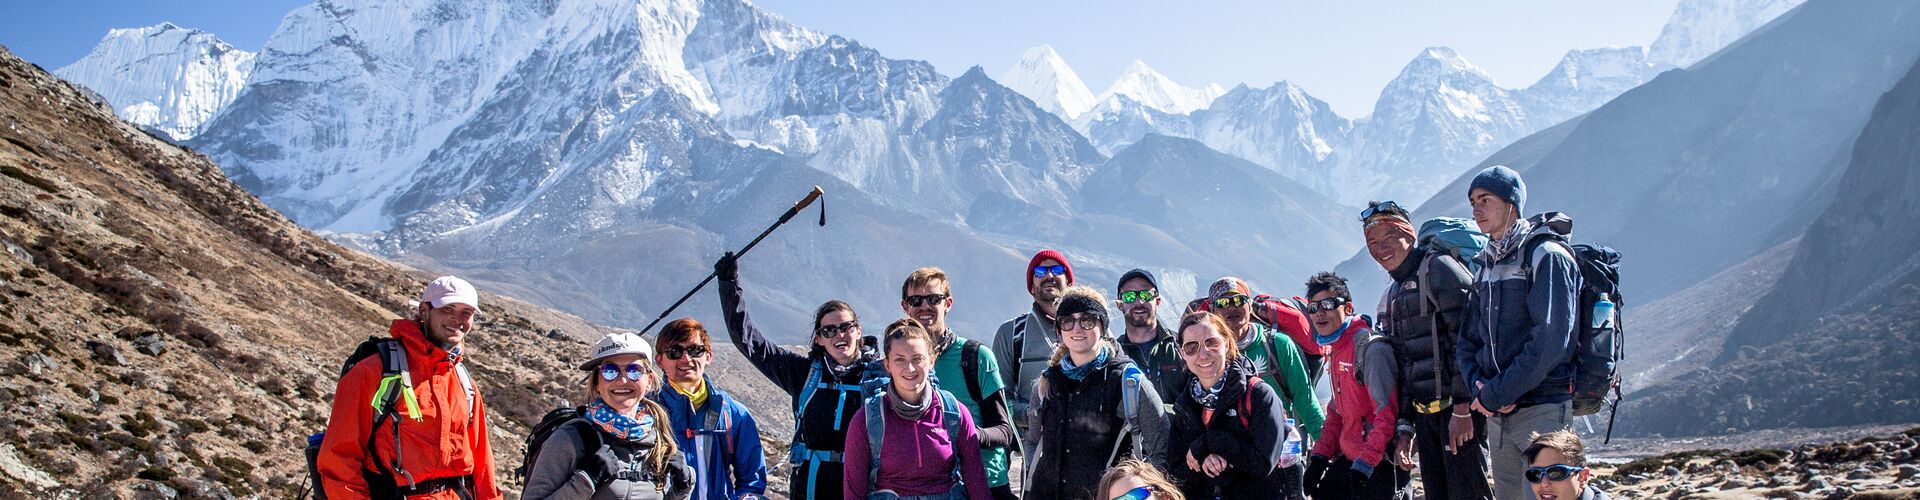 A group of Intrepid hikers posing for a photo with Mt Everest in the background